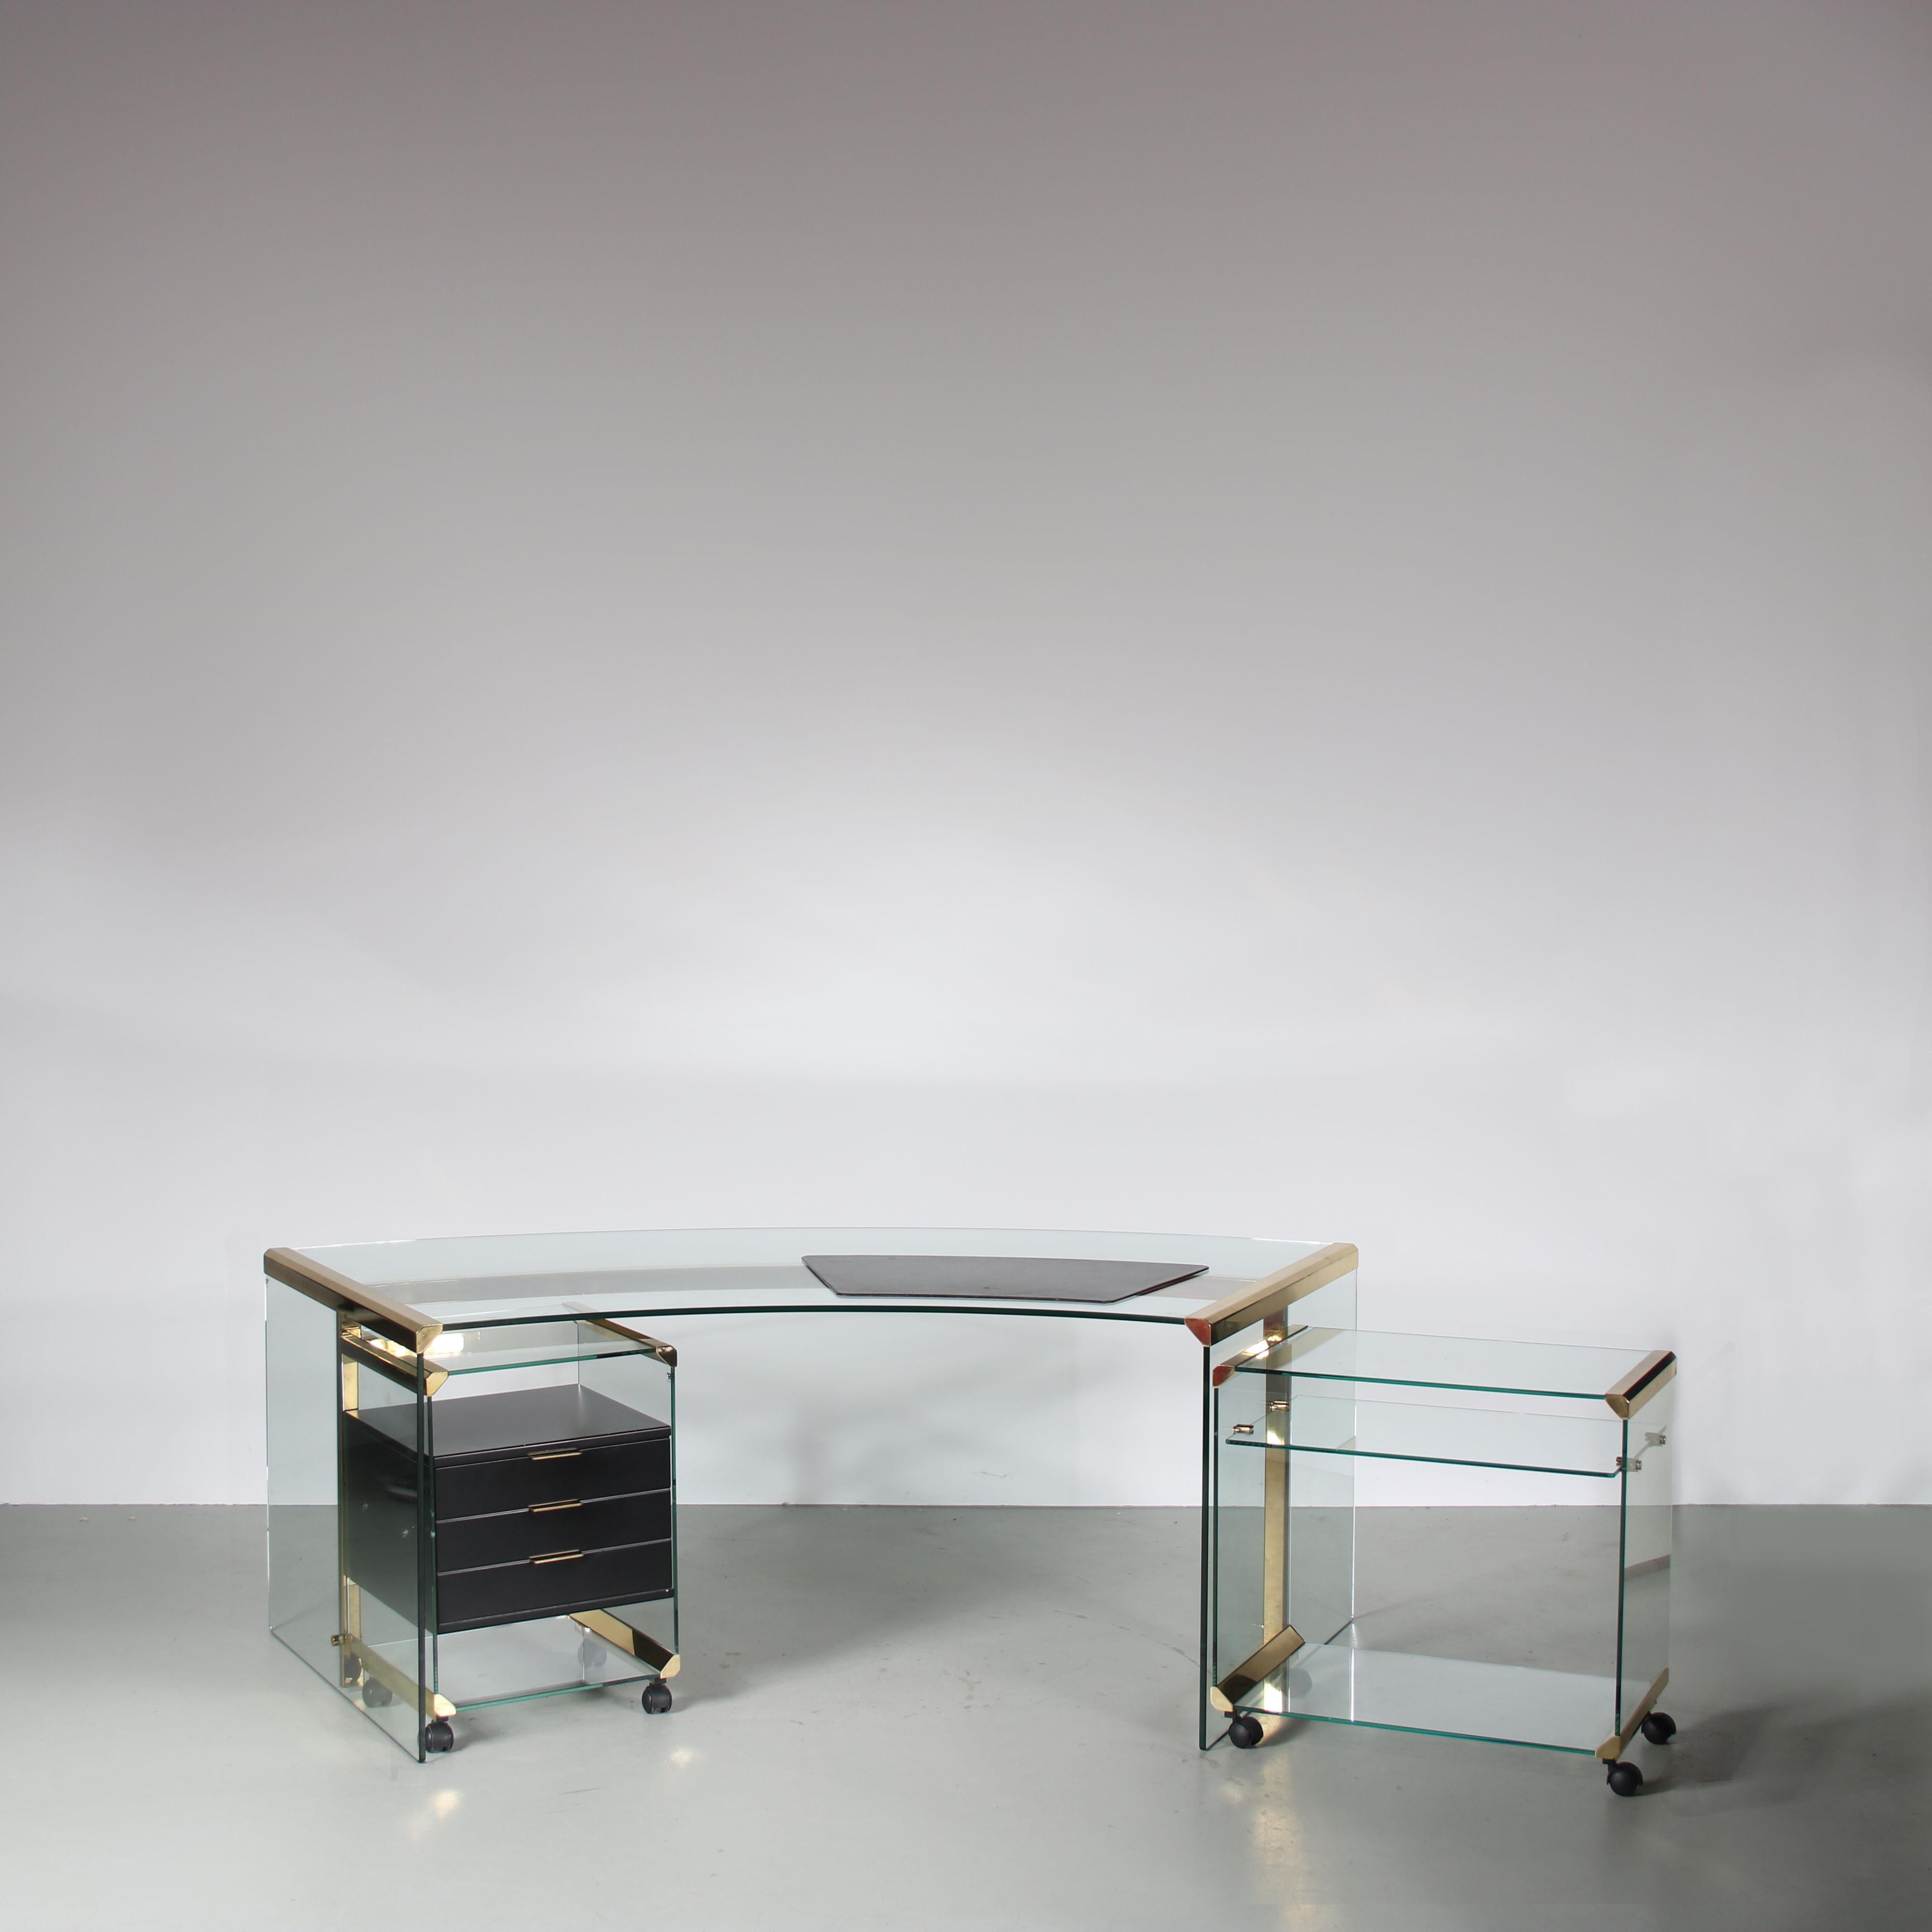 

A stunning piece from the 1970s, this president desk is a true symbol of elegance and sophistication. Designed by Pierangelo Galotti and manufactured by Galotti & Radice in Italy.

The desk is made of beautiful quality clear glass with a brass